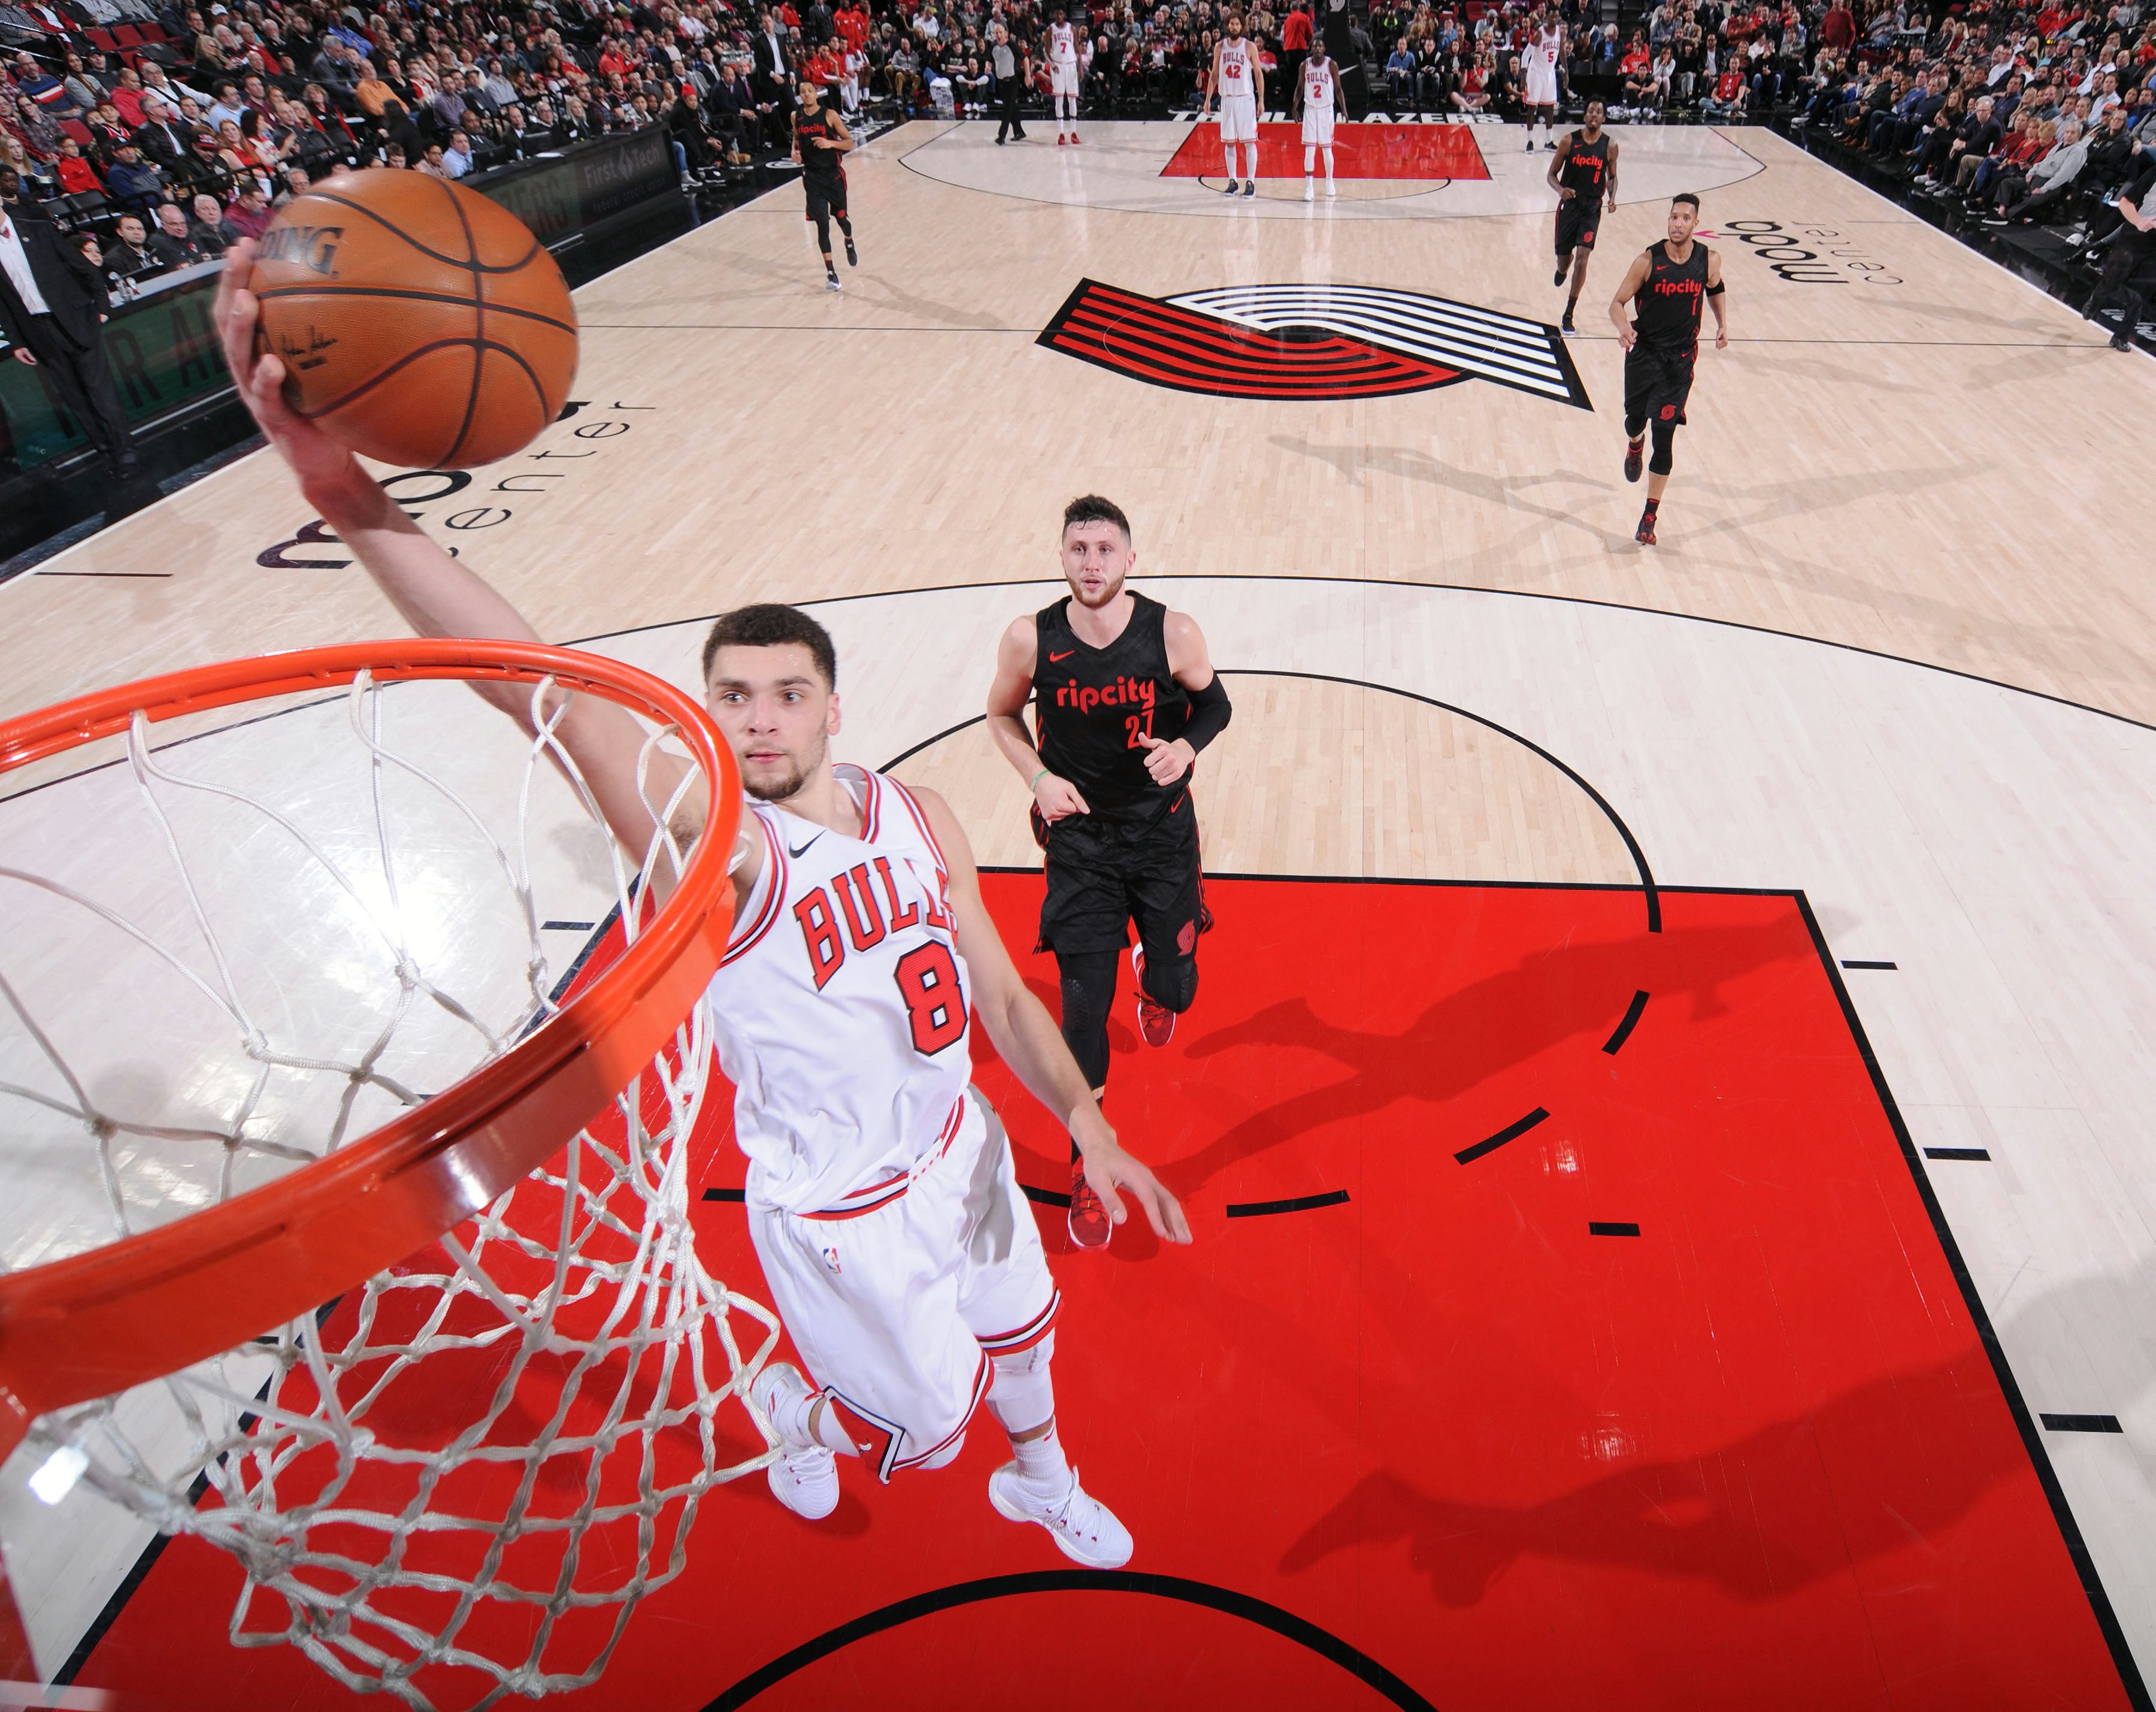 Chicago Bulls: Ranking Zach LaVine amid top 10 2019 in-game dunkers